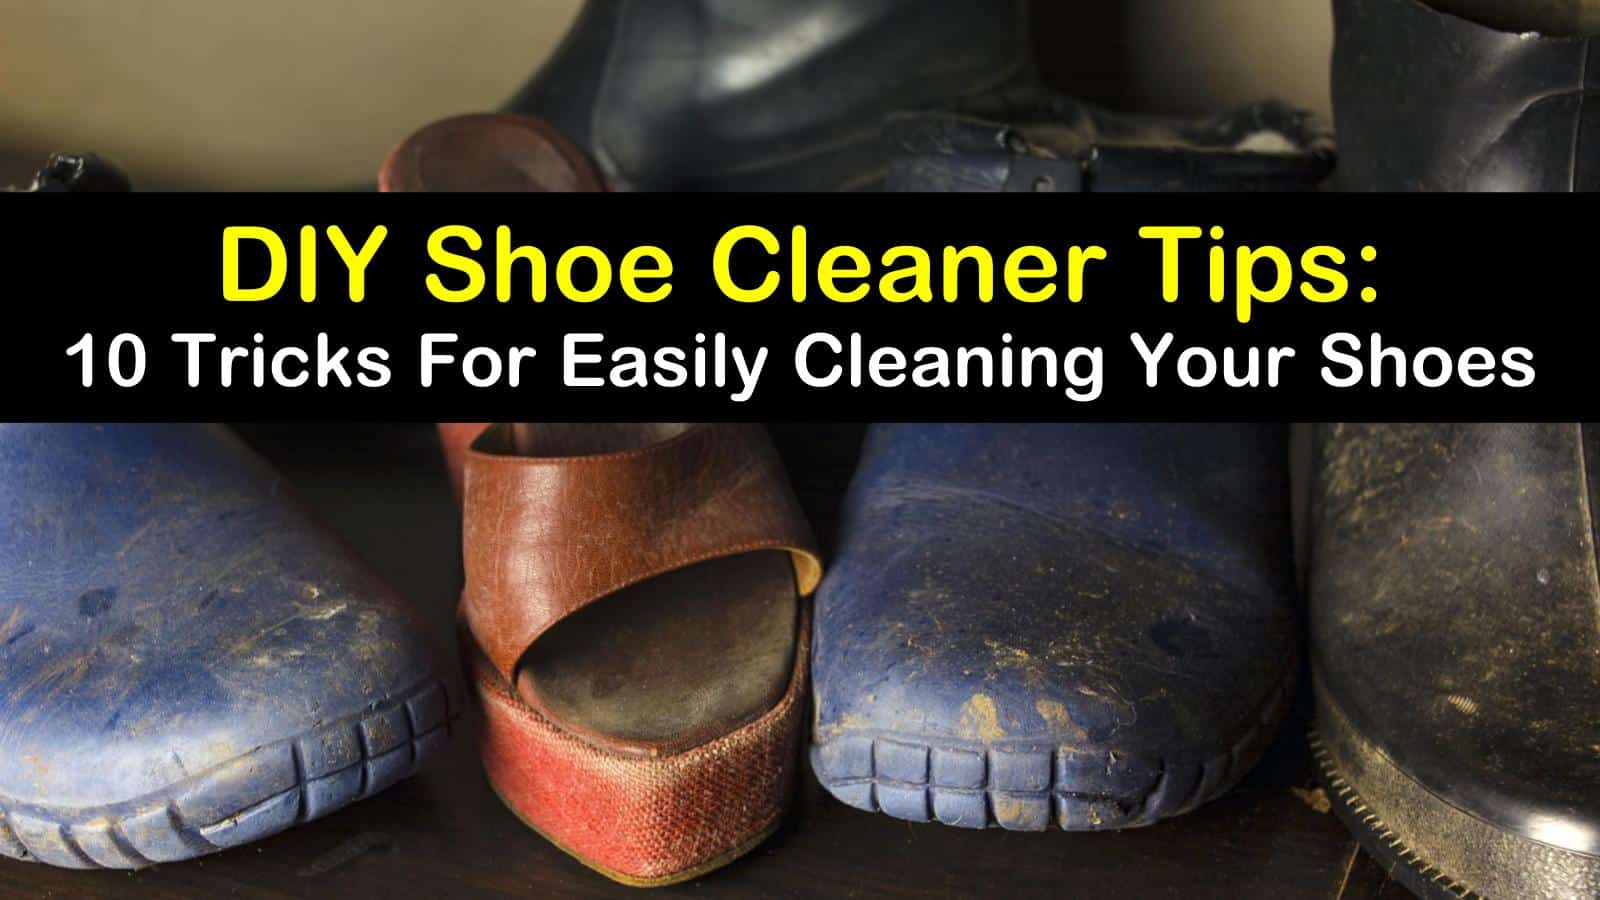 10 Simple Do-It-Yourself Shoe Cleaner 